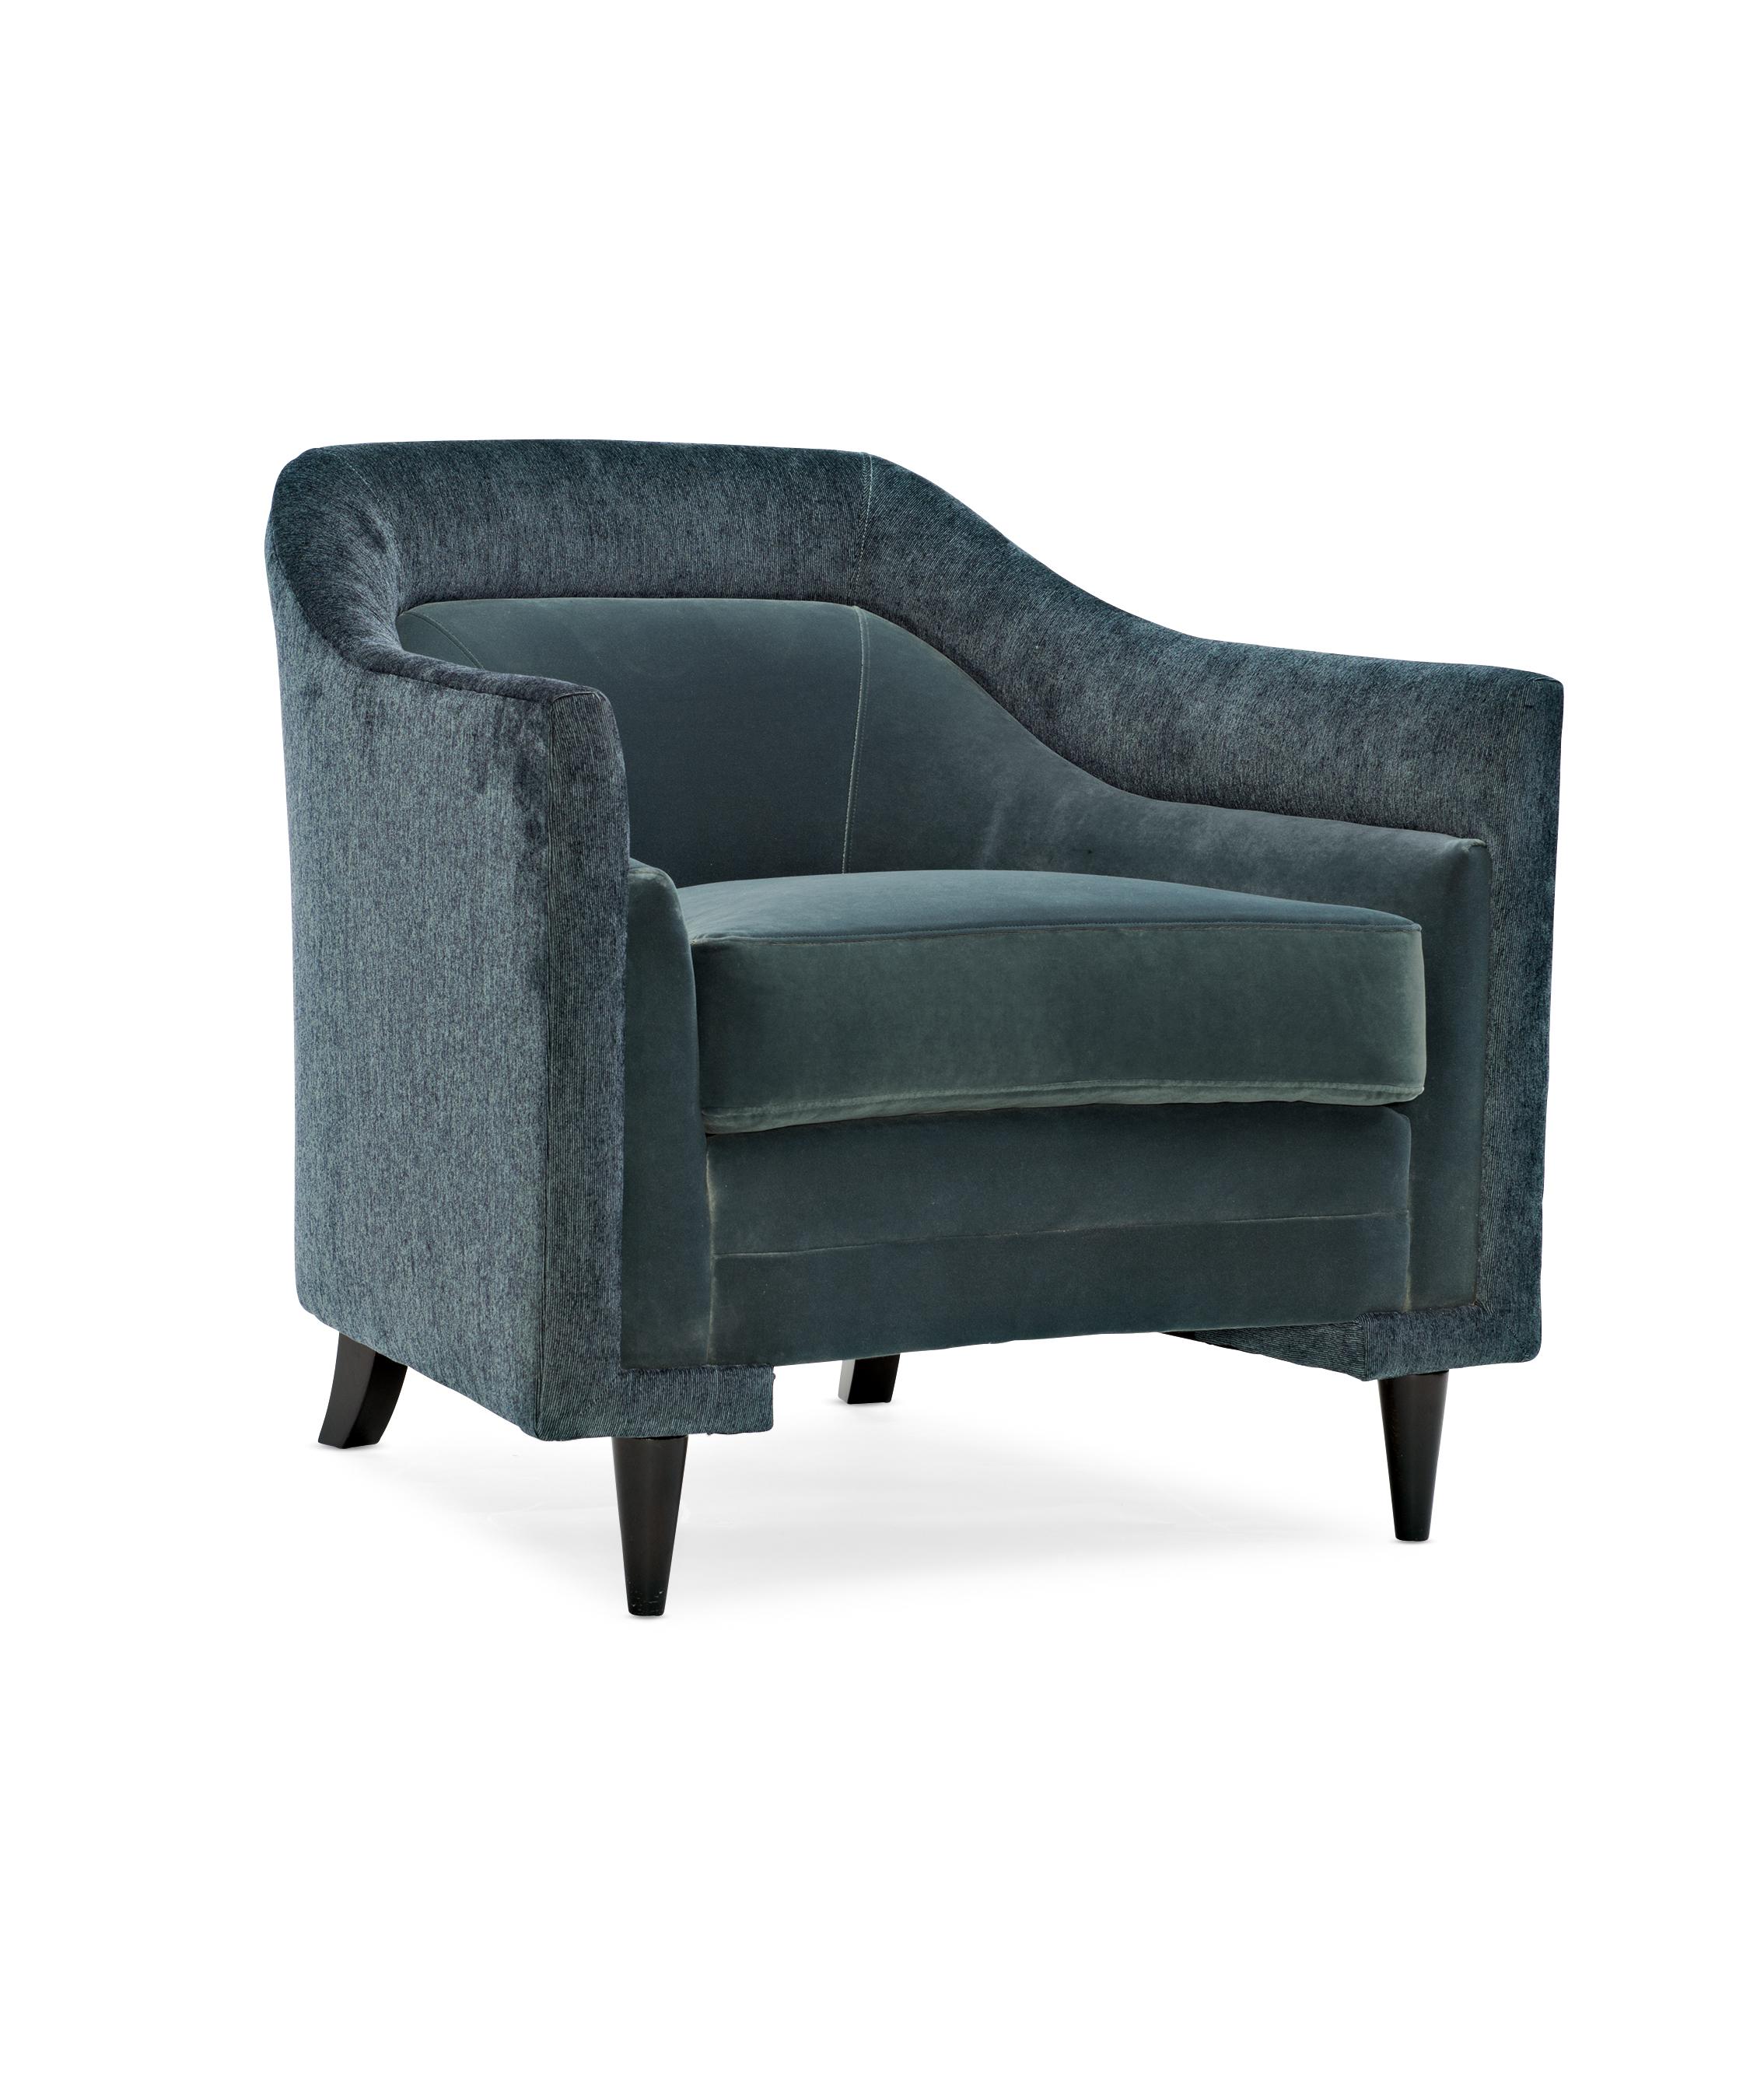 Contemporary Accent Chair DOUBLE EDGE CHAIR M100-419-034-A in Teal Velvet